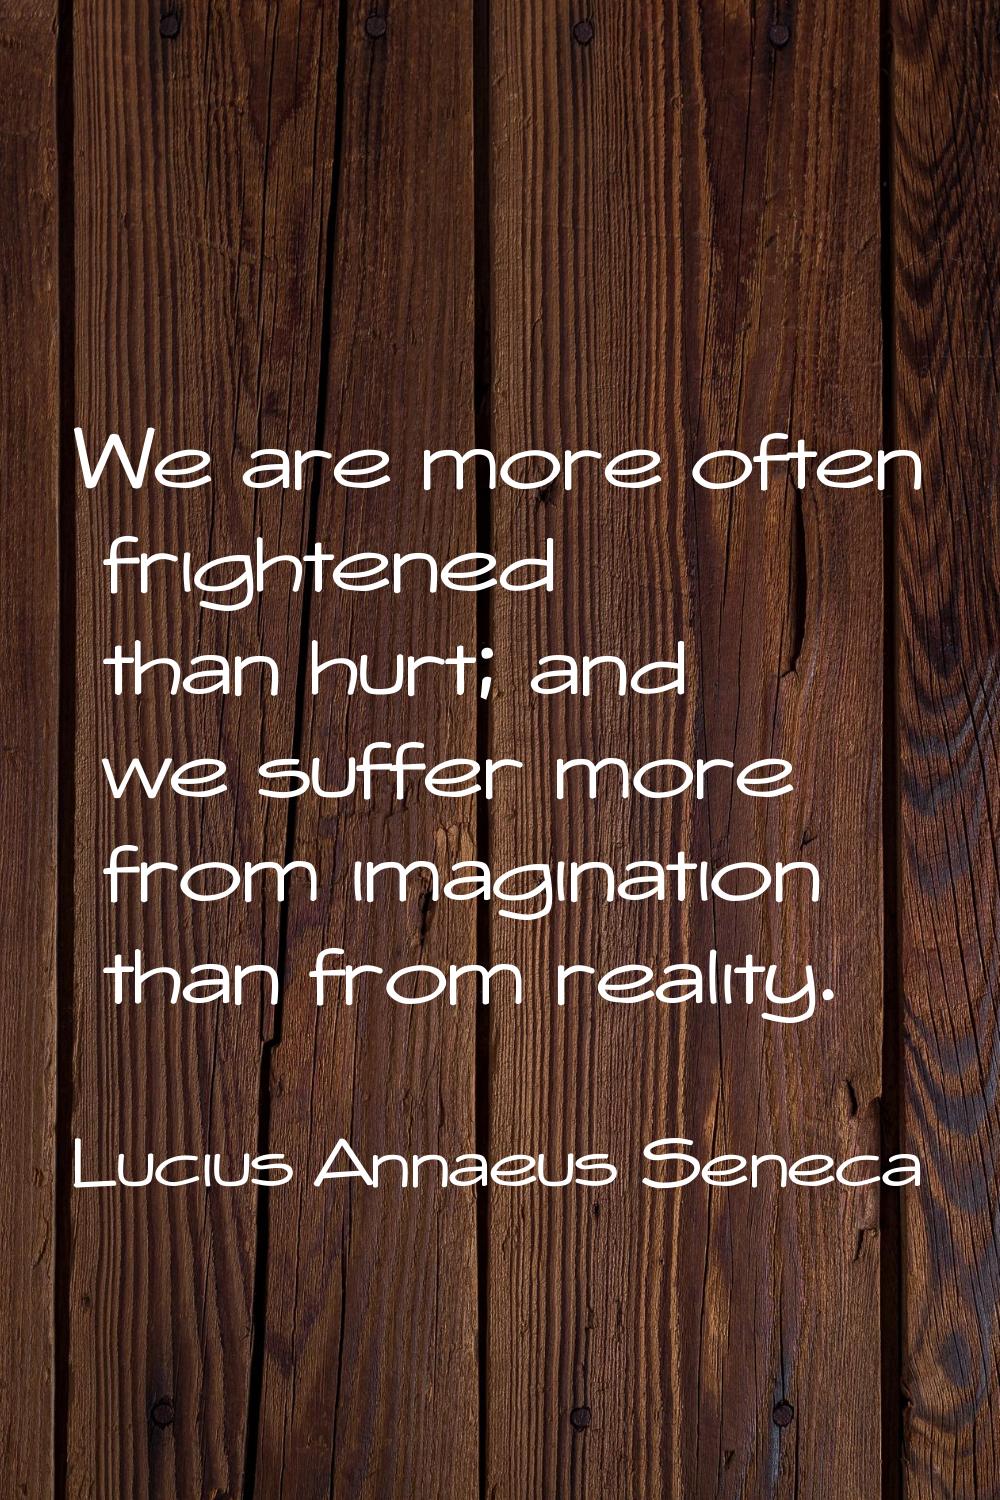 We are more often frightened than hurt; and we suffer more from imagination than from reality.